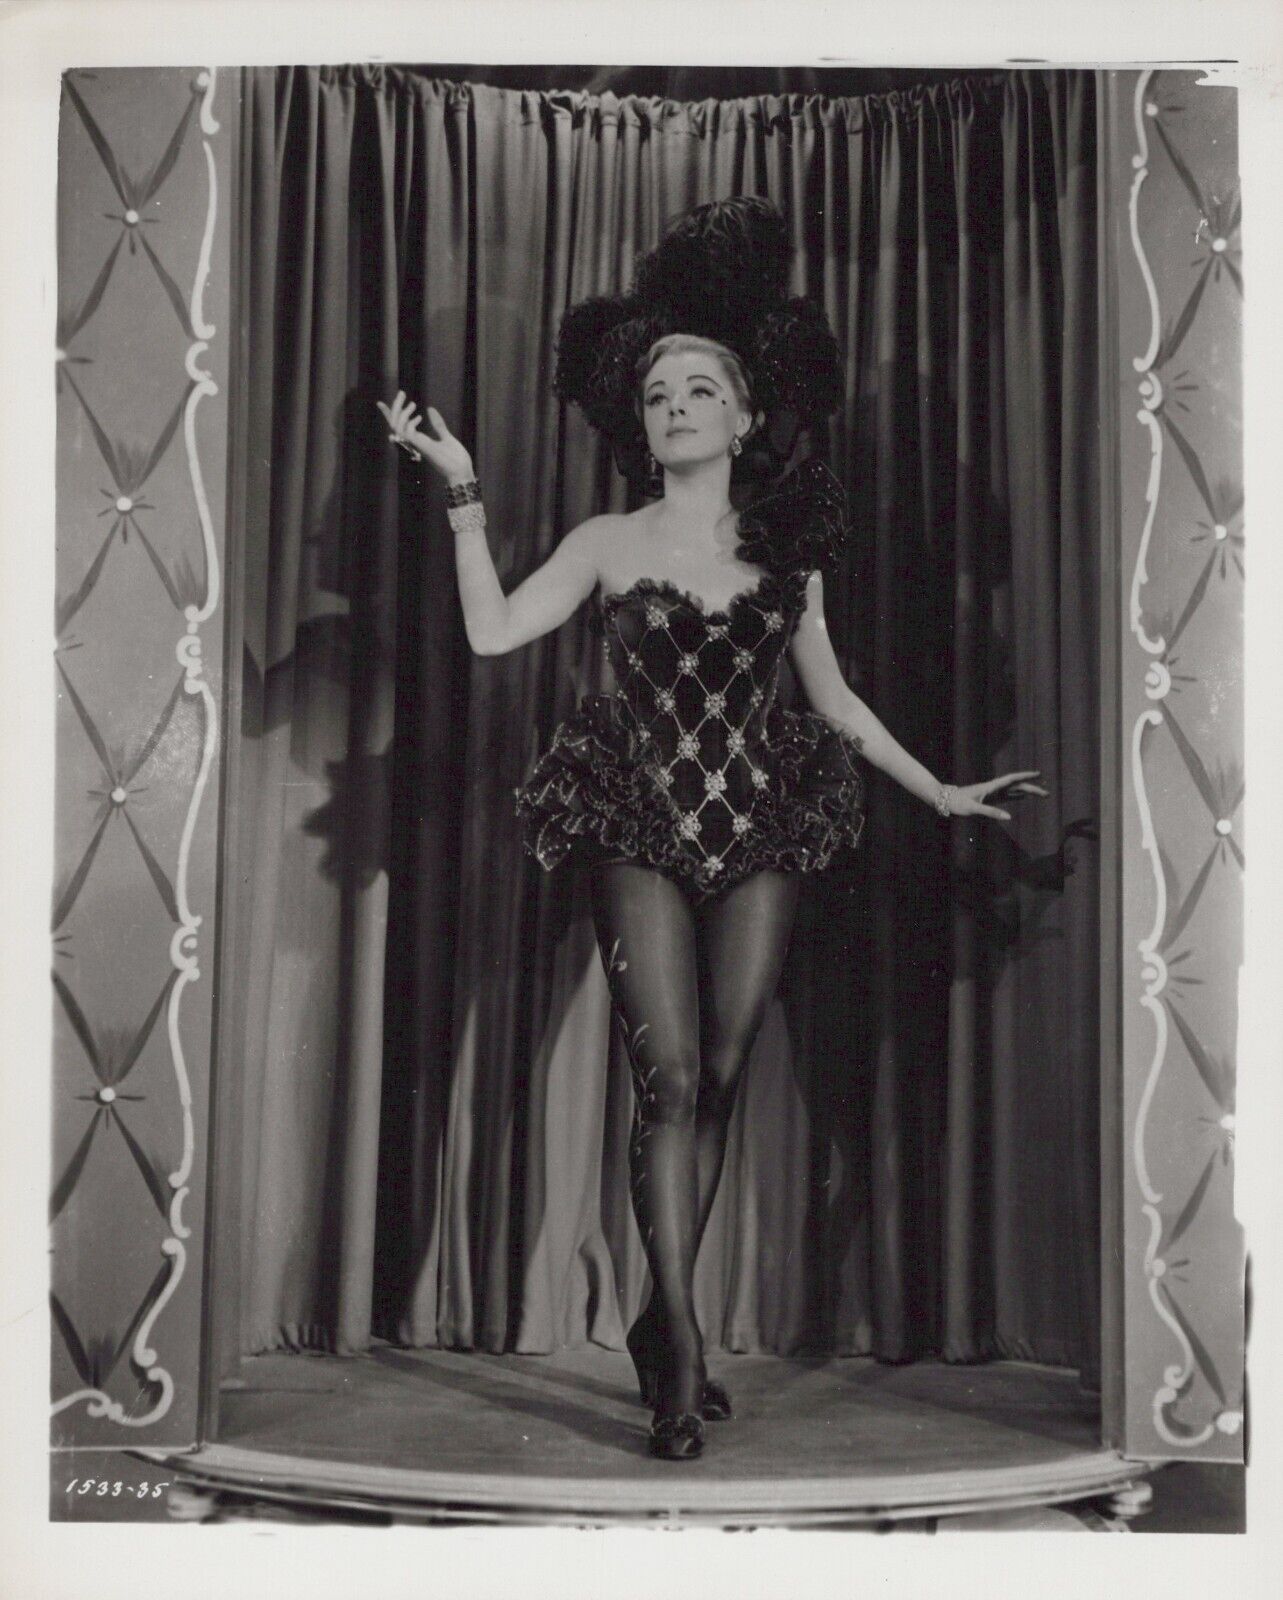 Eleanor Parker (1950s) ❤ Leggy Cheesecake Collectable Vintage Photo K 522